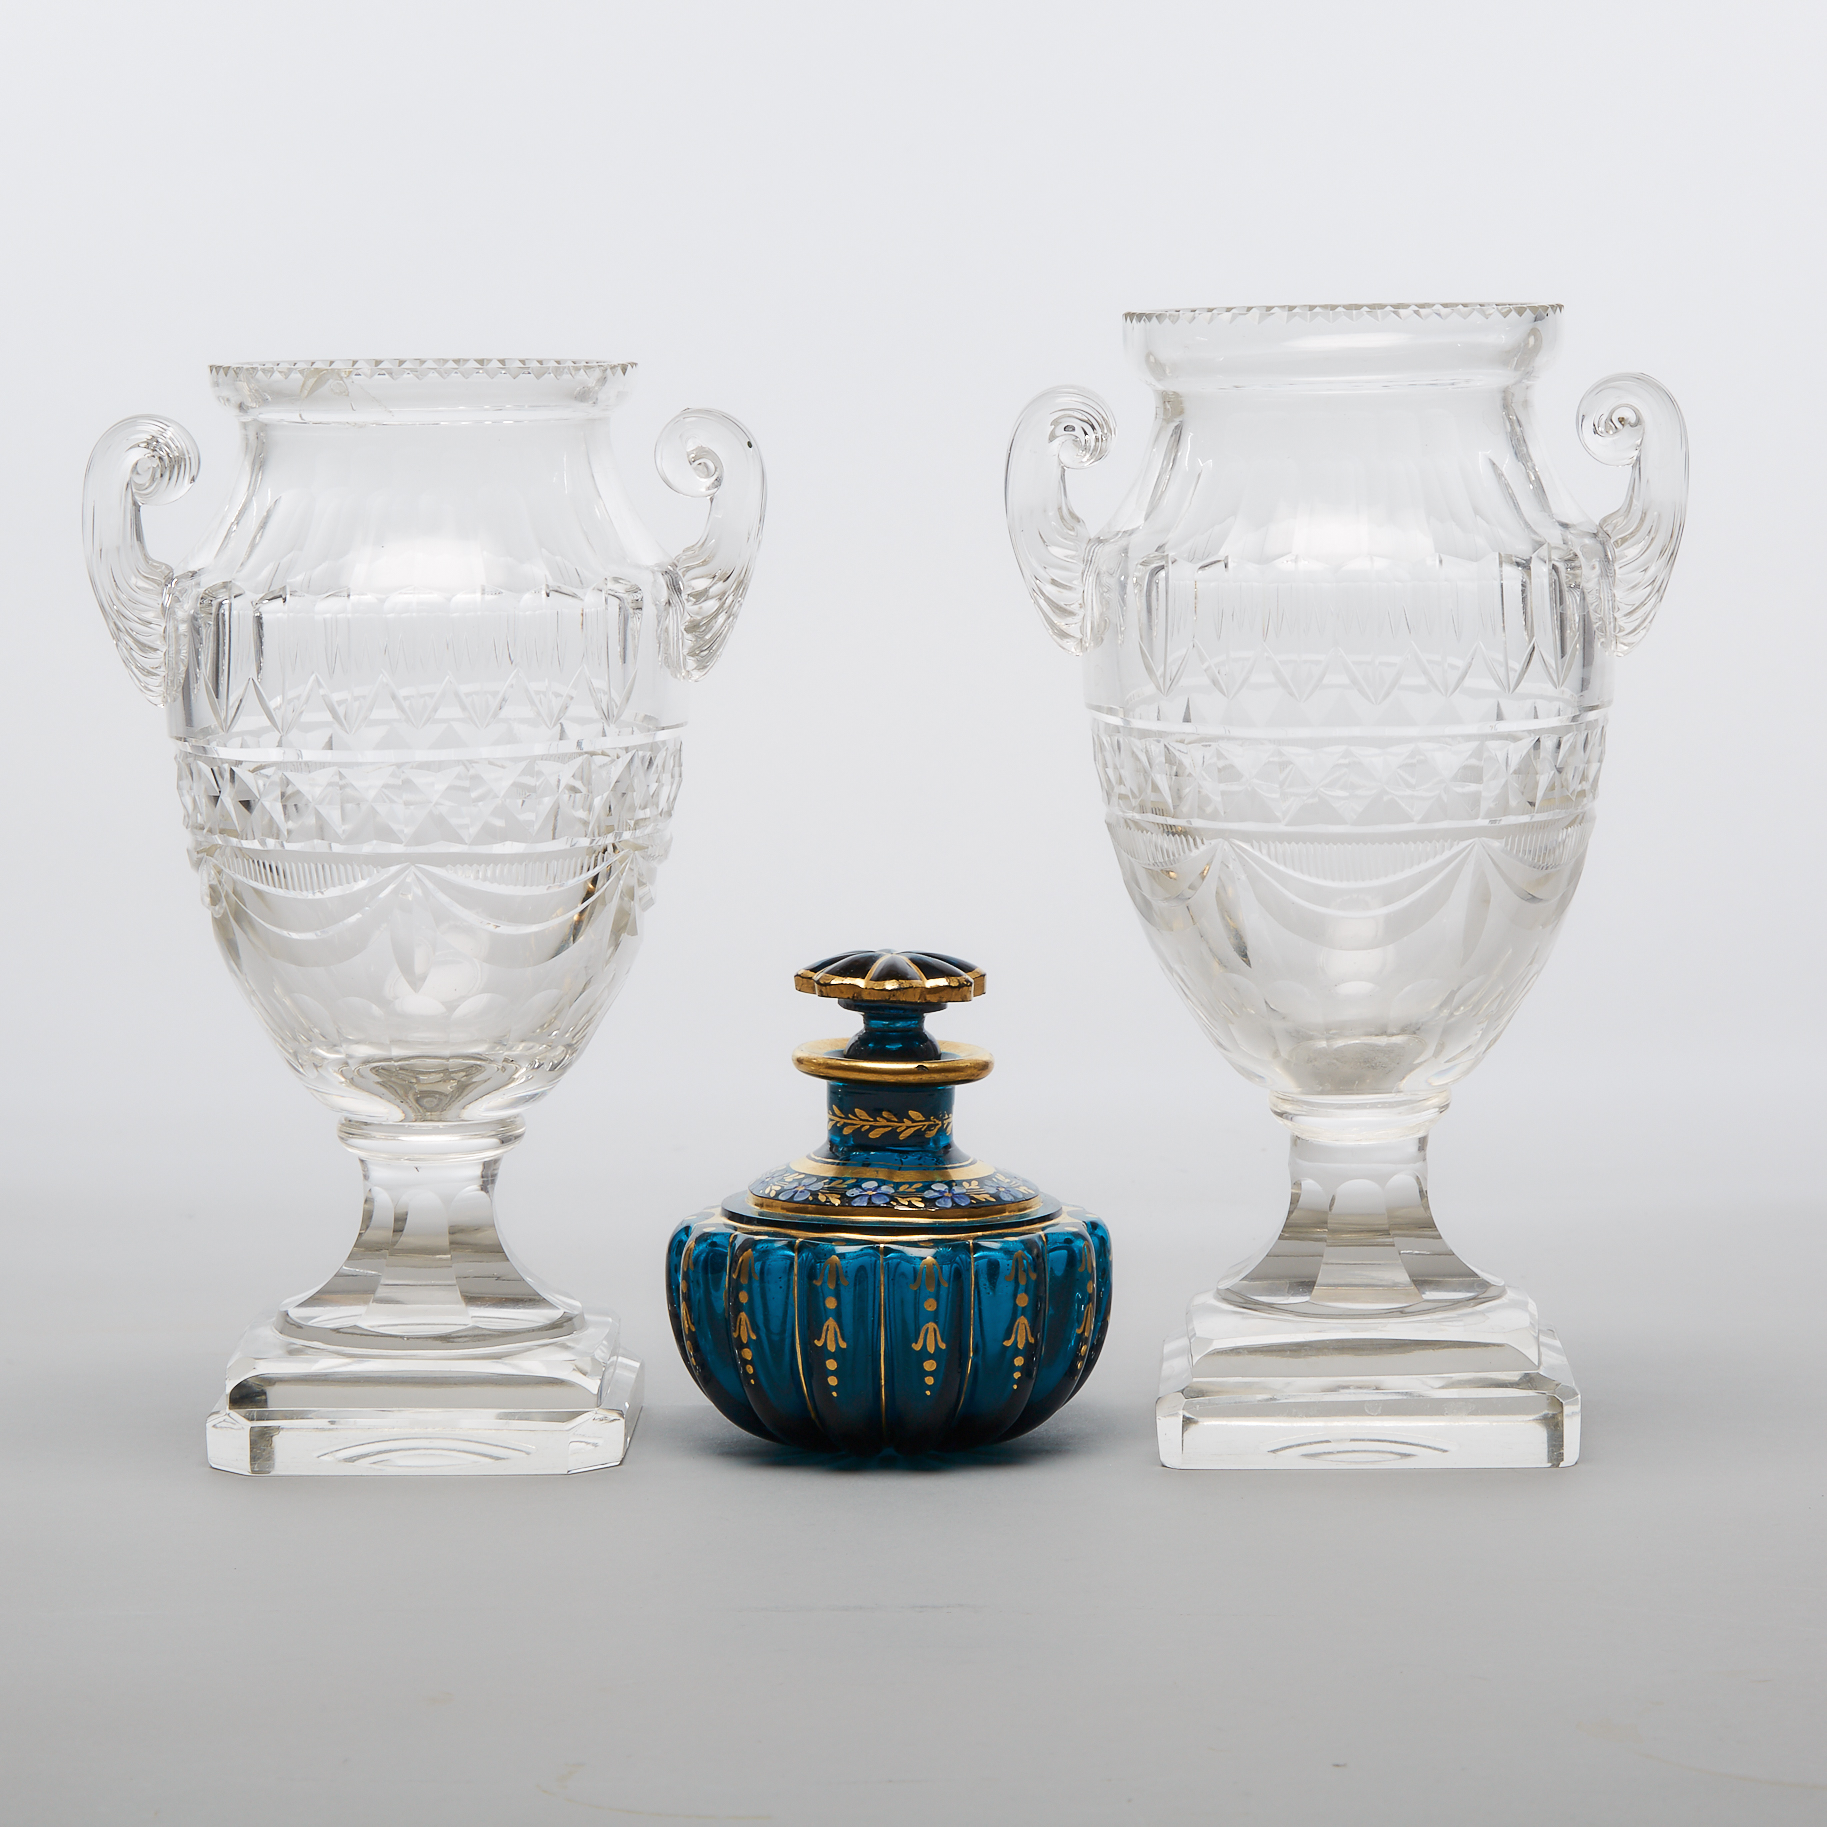 Pair of Continental Cut Glass Vases and an Enameled and Gilt Blue Glass Perfume Bottle, late 19th century